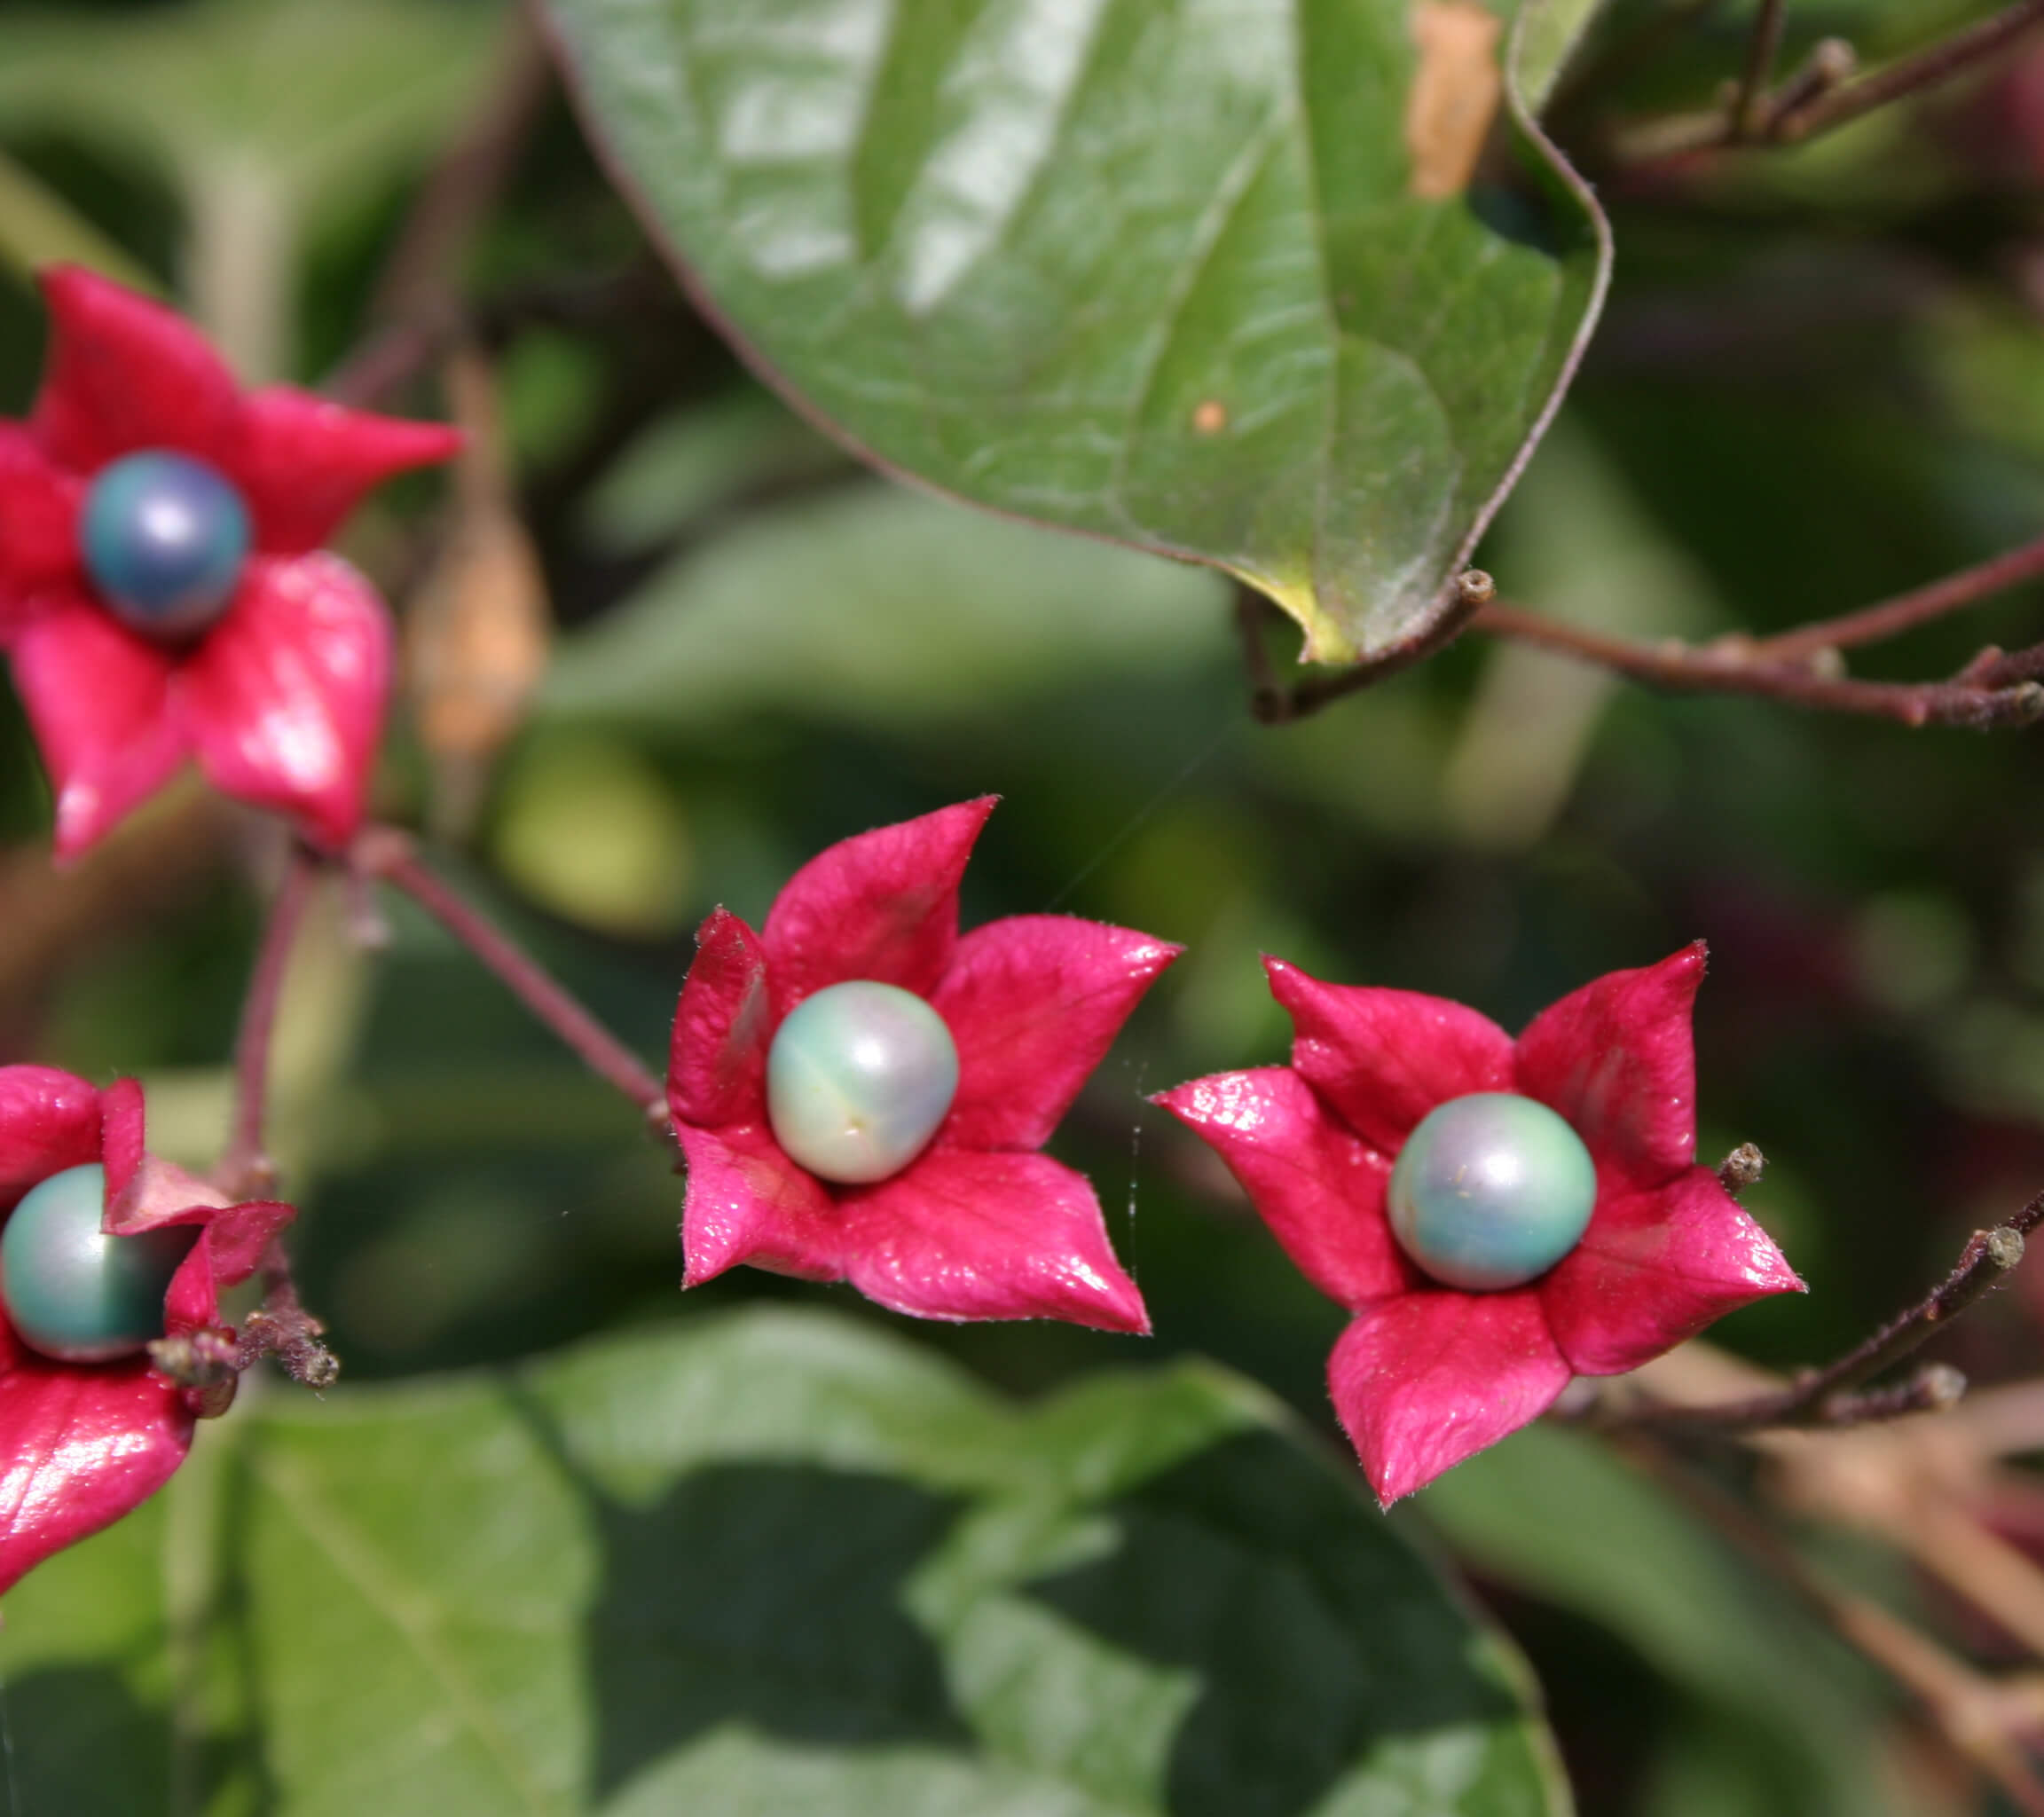 Clerodendron trichotomum fruits look almost like flowers and remain colorful on the shrubs until early fall.